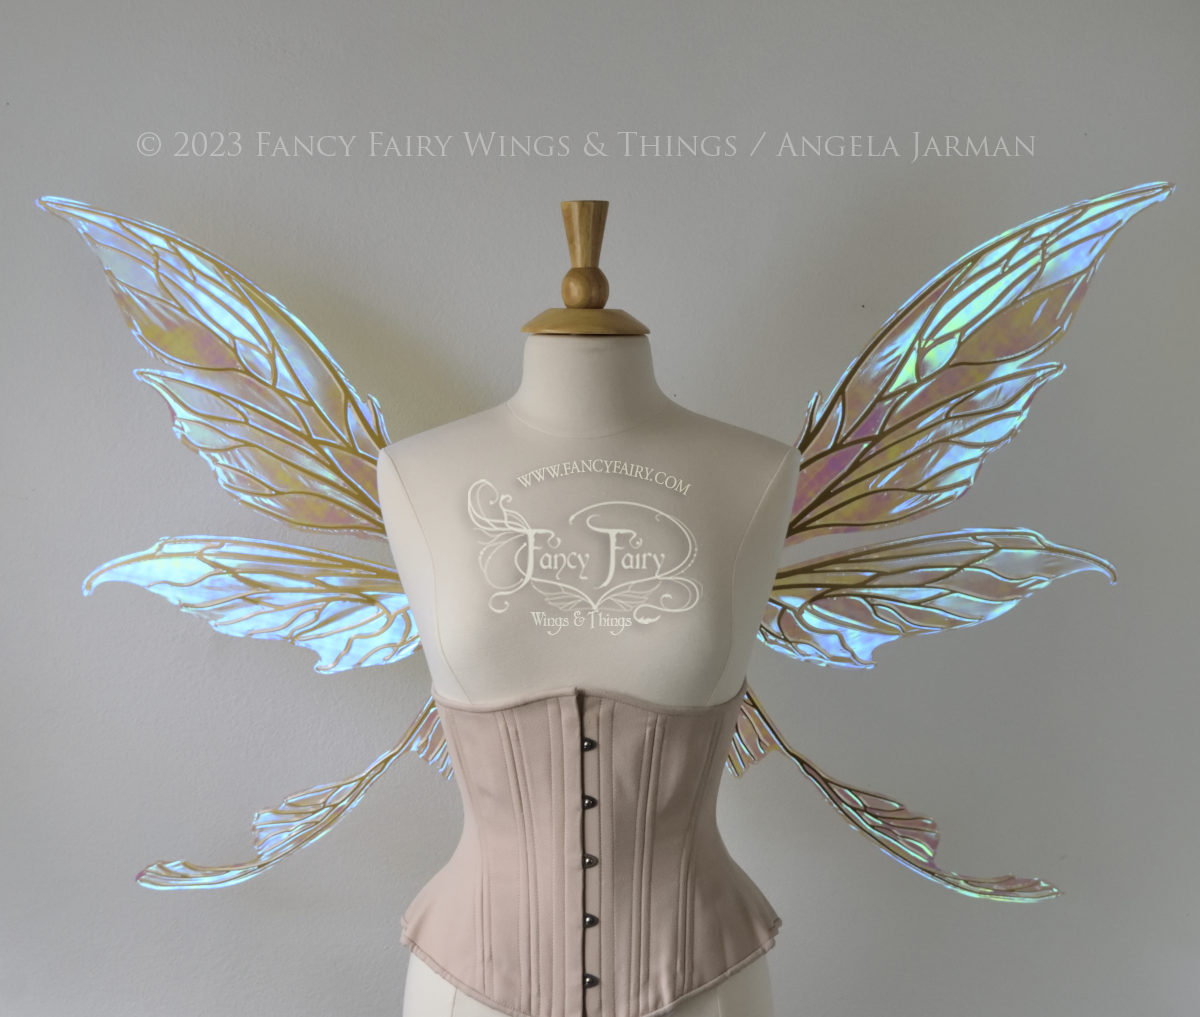 Front view of a dress form wearing an underbust corset & large blue iridescent fairy wings with gold veins. Upper panels are elongated with pointed tips, curved ‘tail’ 